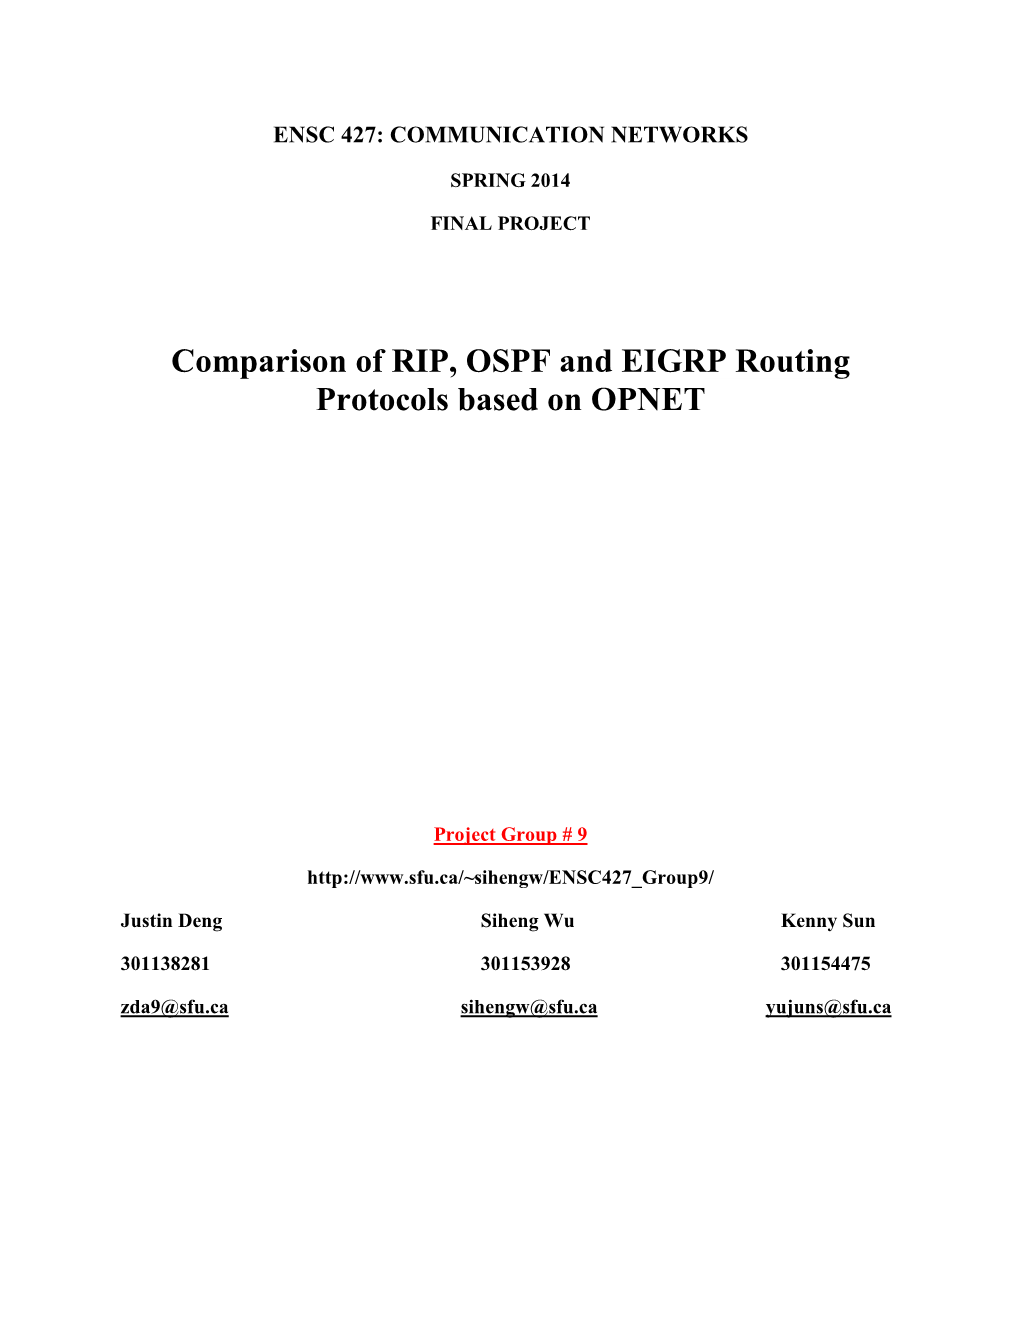 Comparison of RIP, OSPF and EIGRP Routing Protocols Based on OPNET